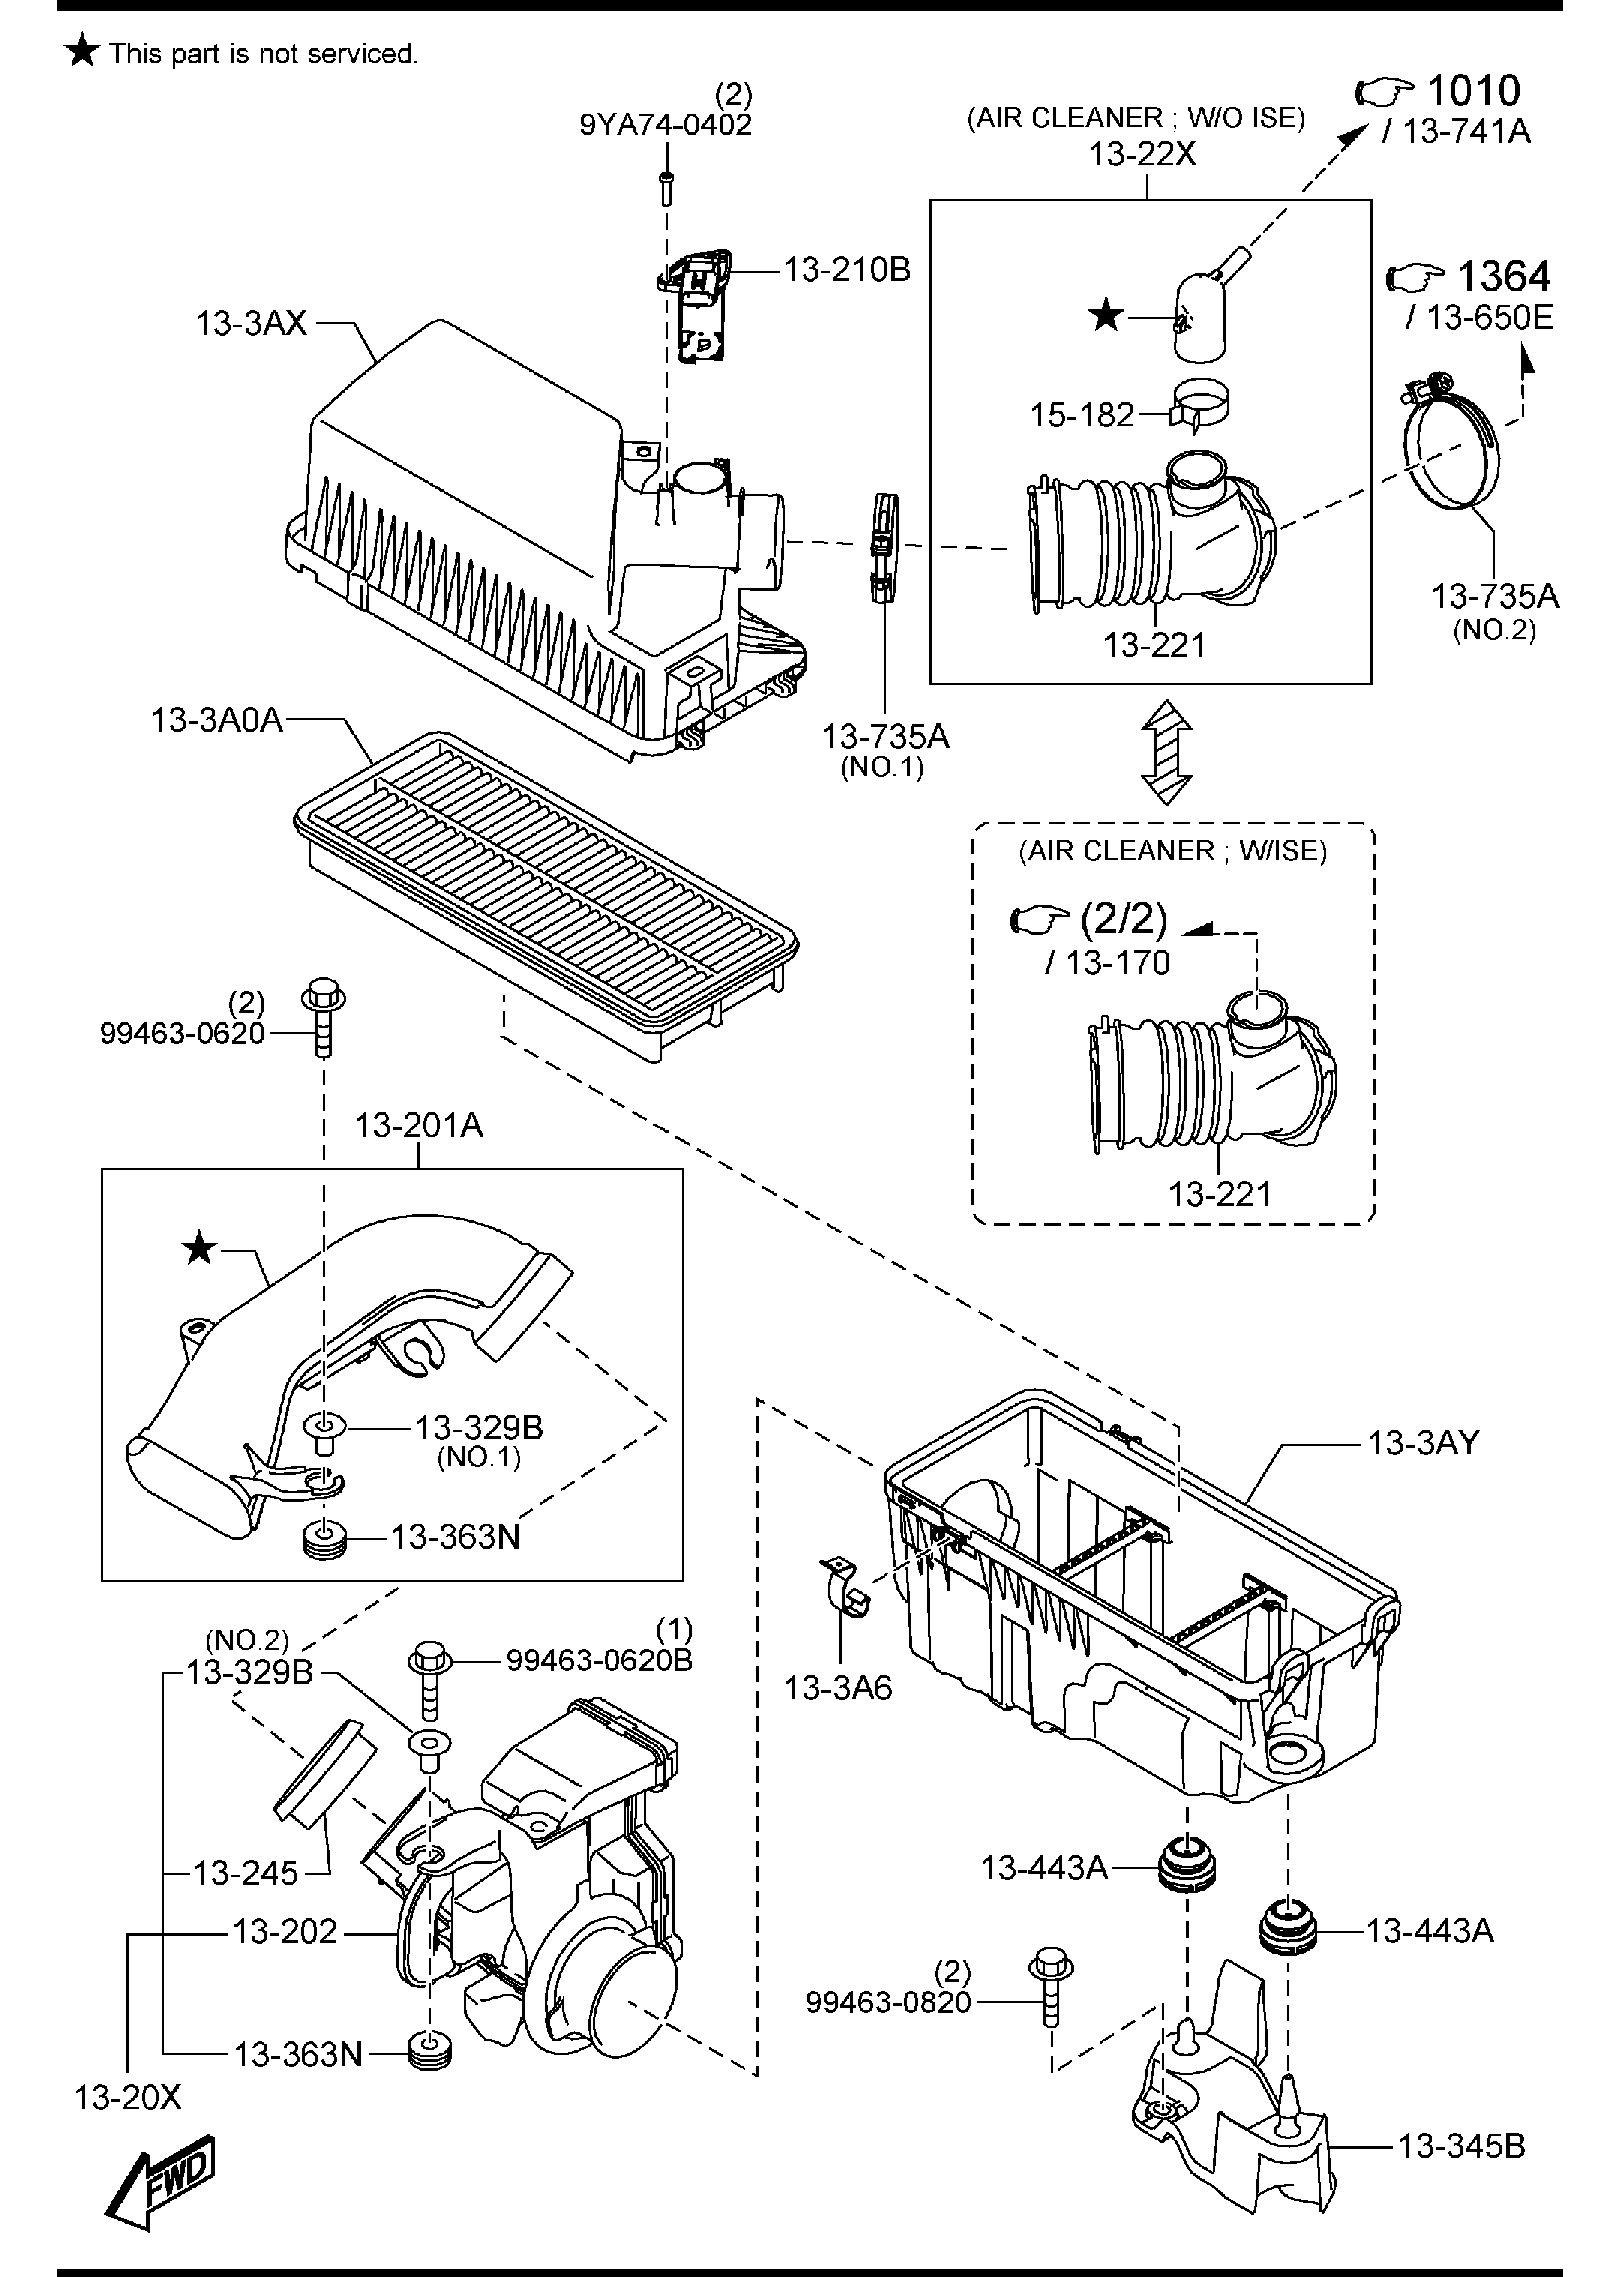 Diagram AIR CLEANER for your 1995 Mazda